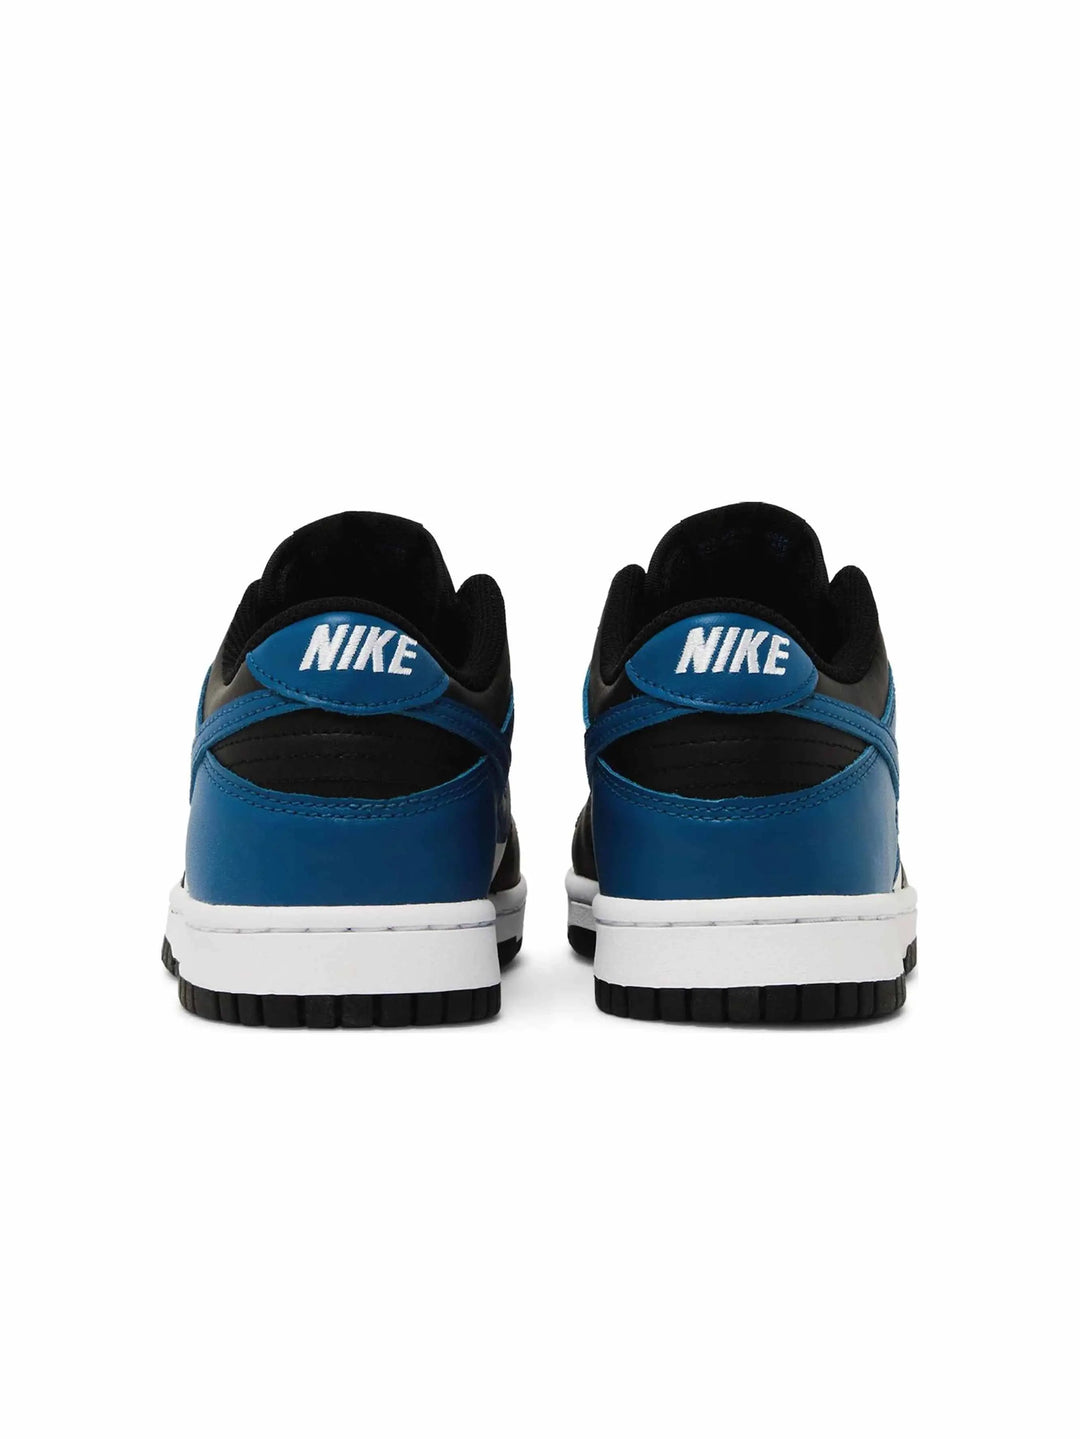 Nike Dunk Low Industrial Blue (GS) in Auckland, New Zealand - Shop name